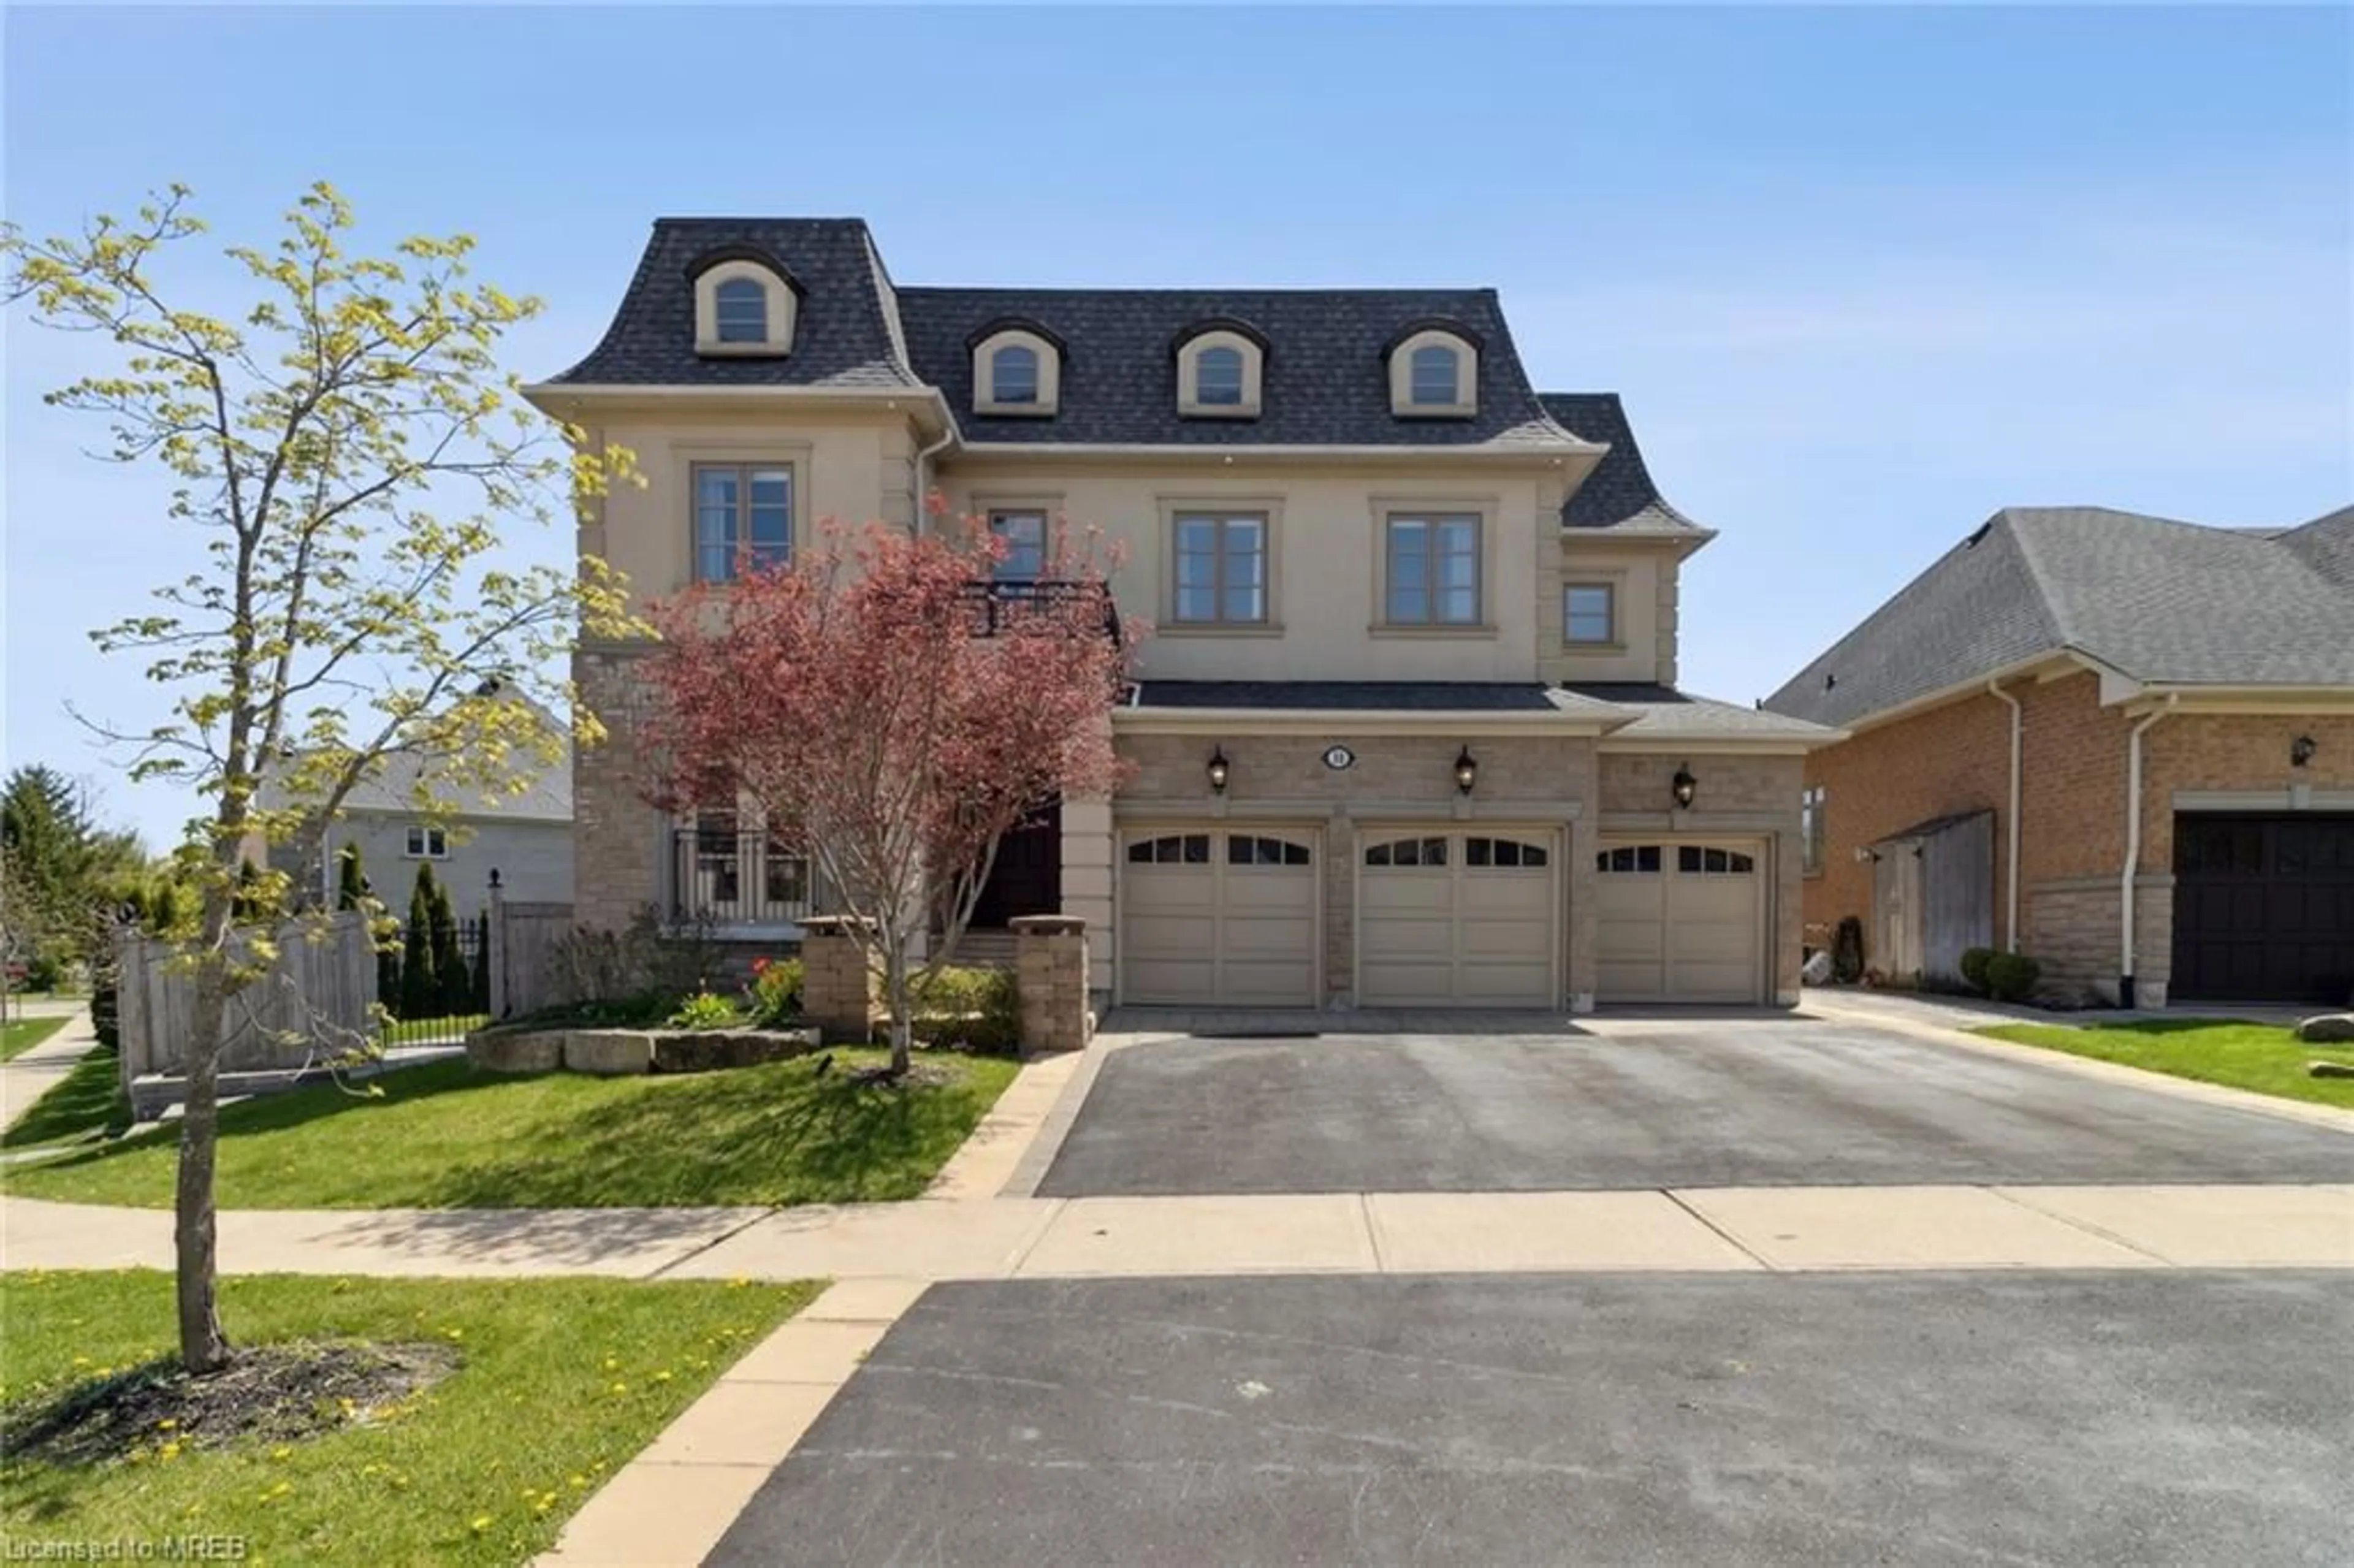 Frontside or backside of a home for 31 Pagean Dr, Richmond Hill Ontario L4E 4R8